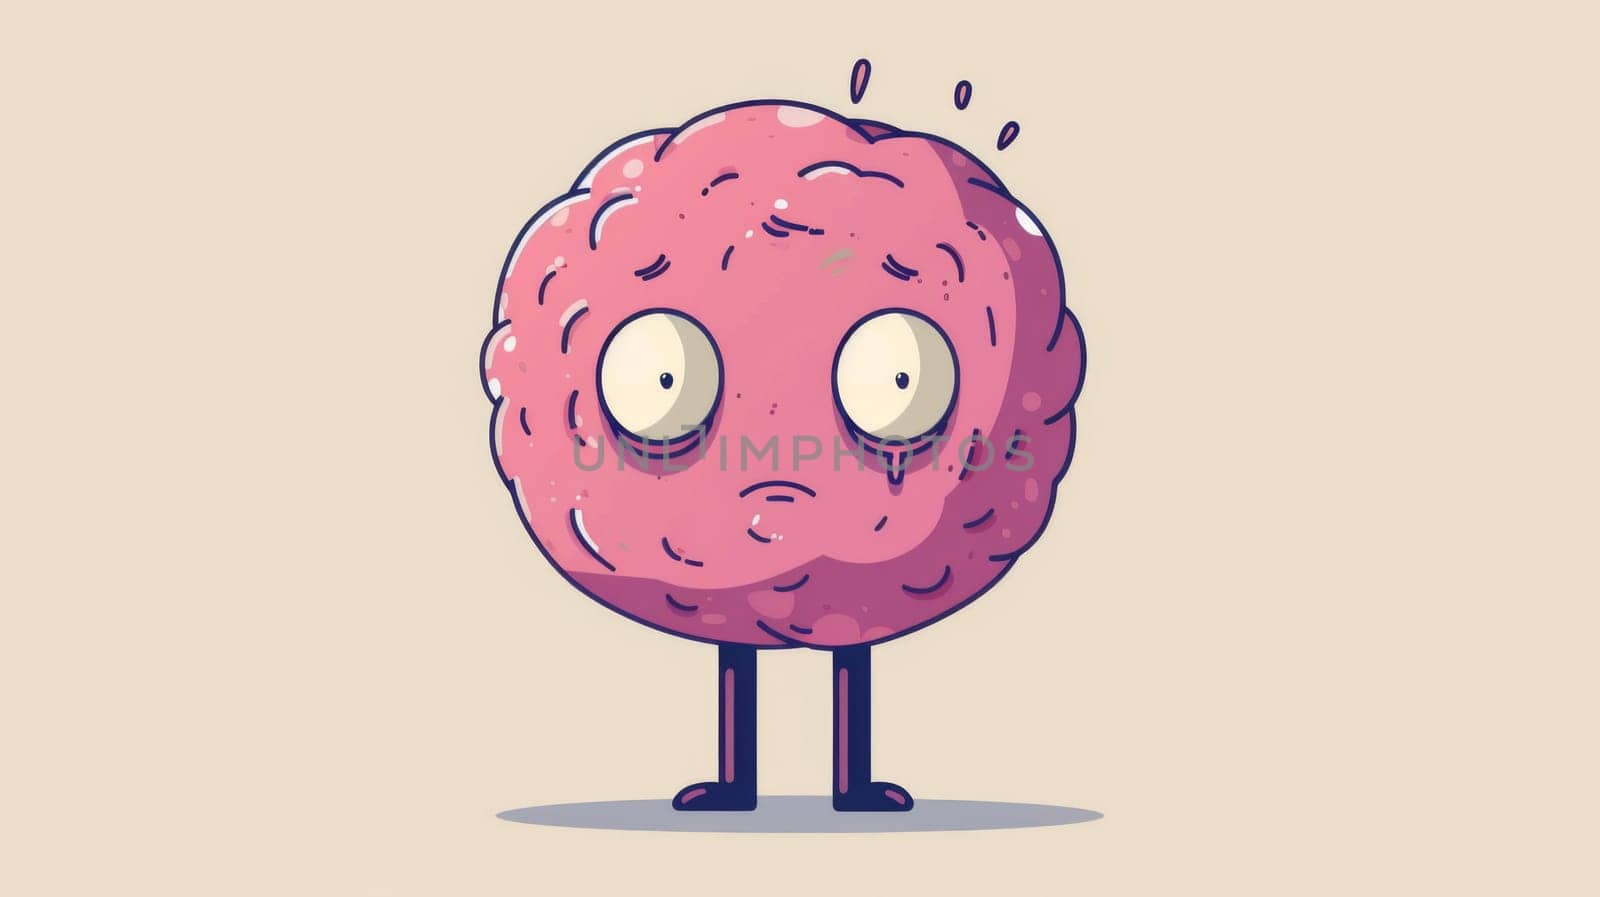 A cartoon brain with eyes and mouth standing on a beige background